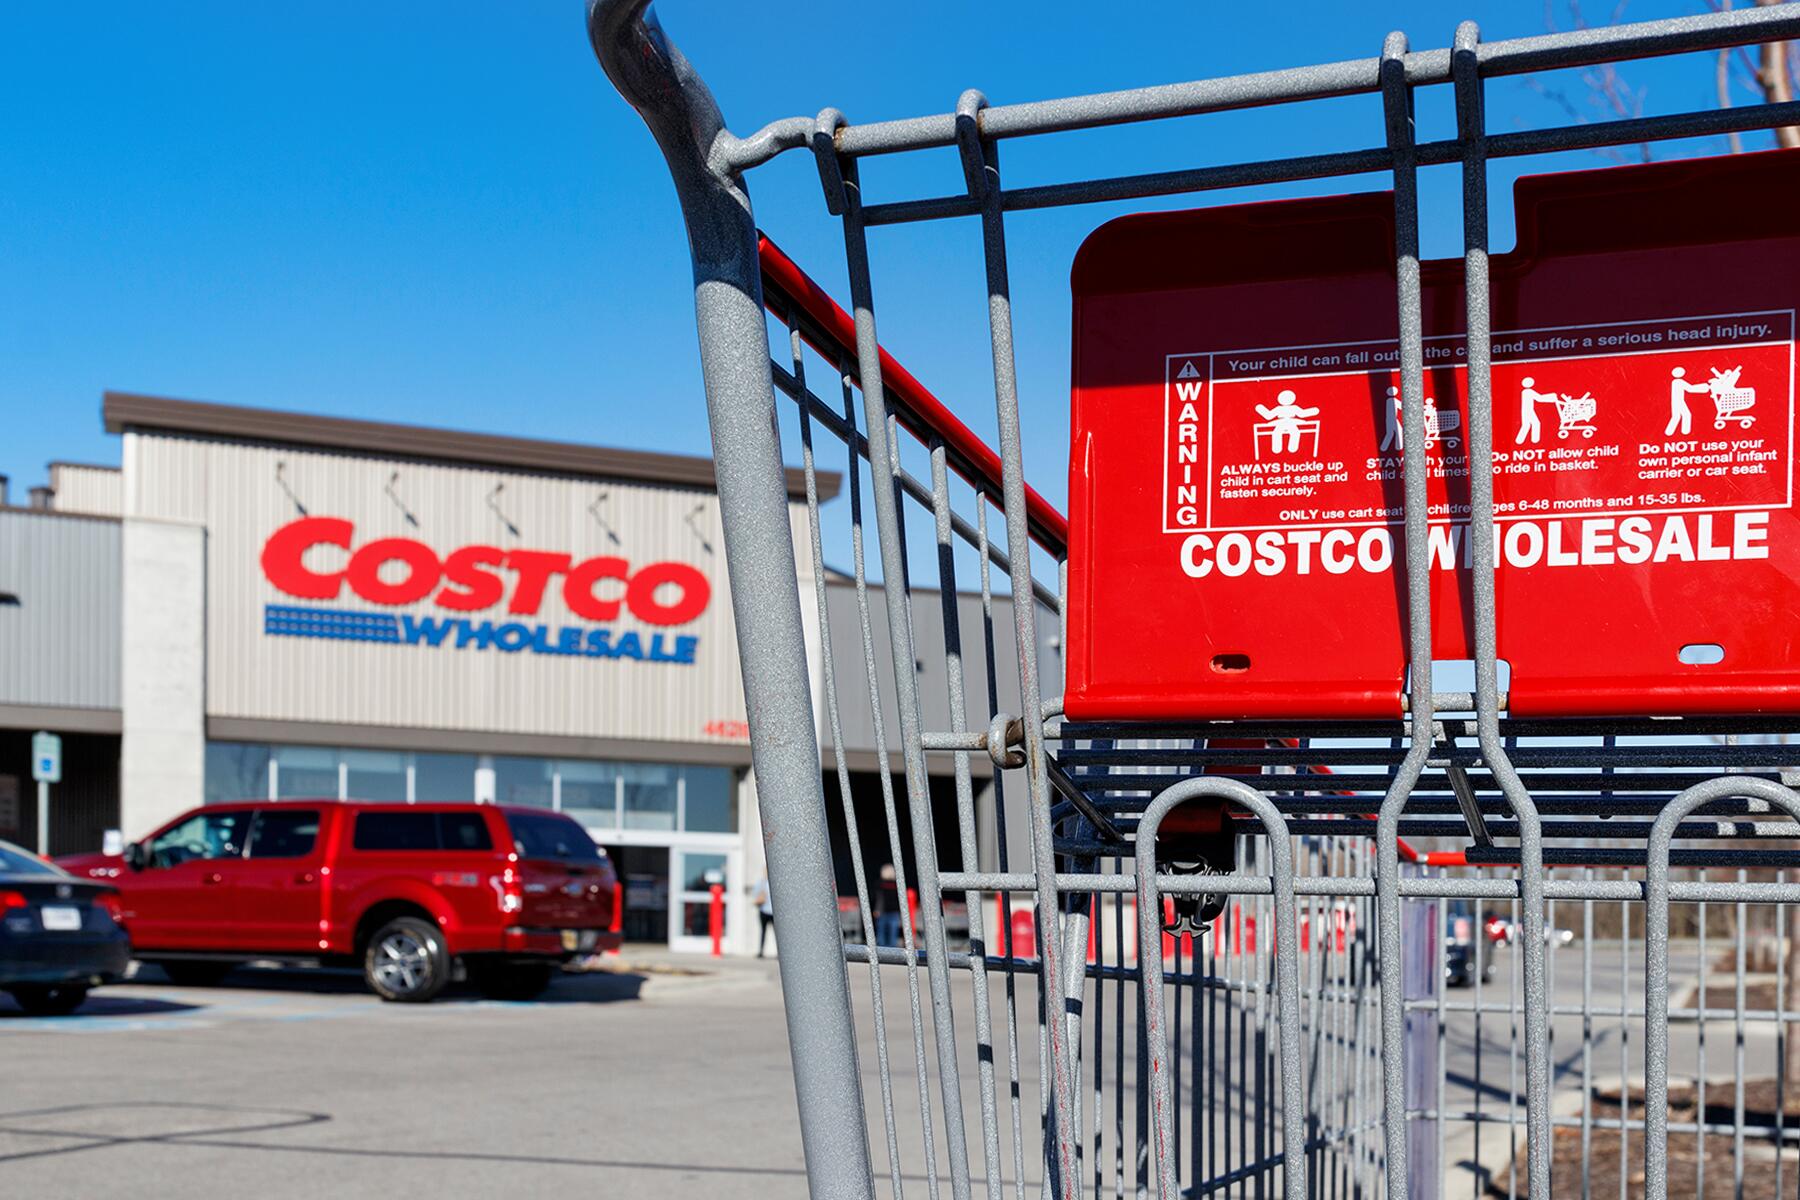 are costco travel packages per person